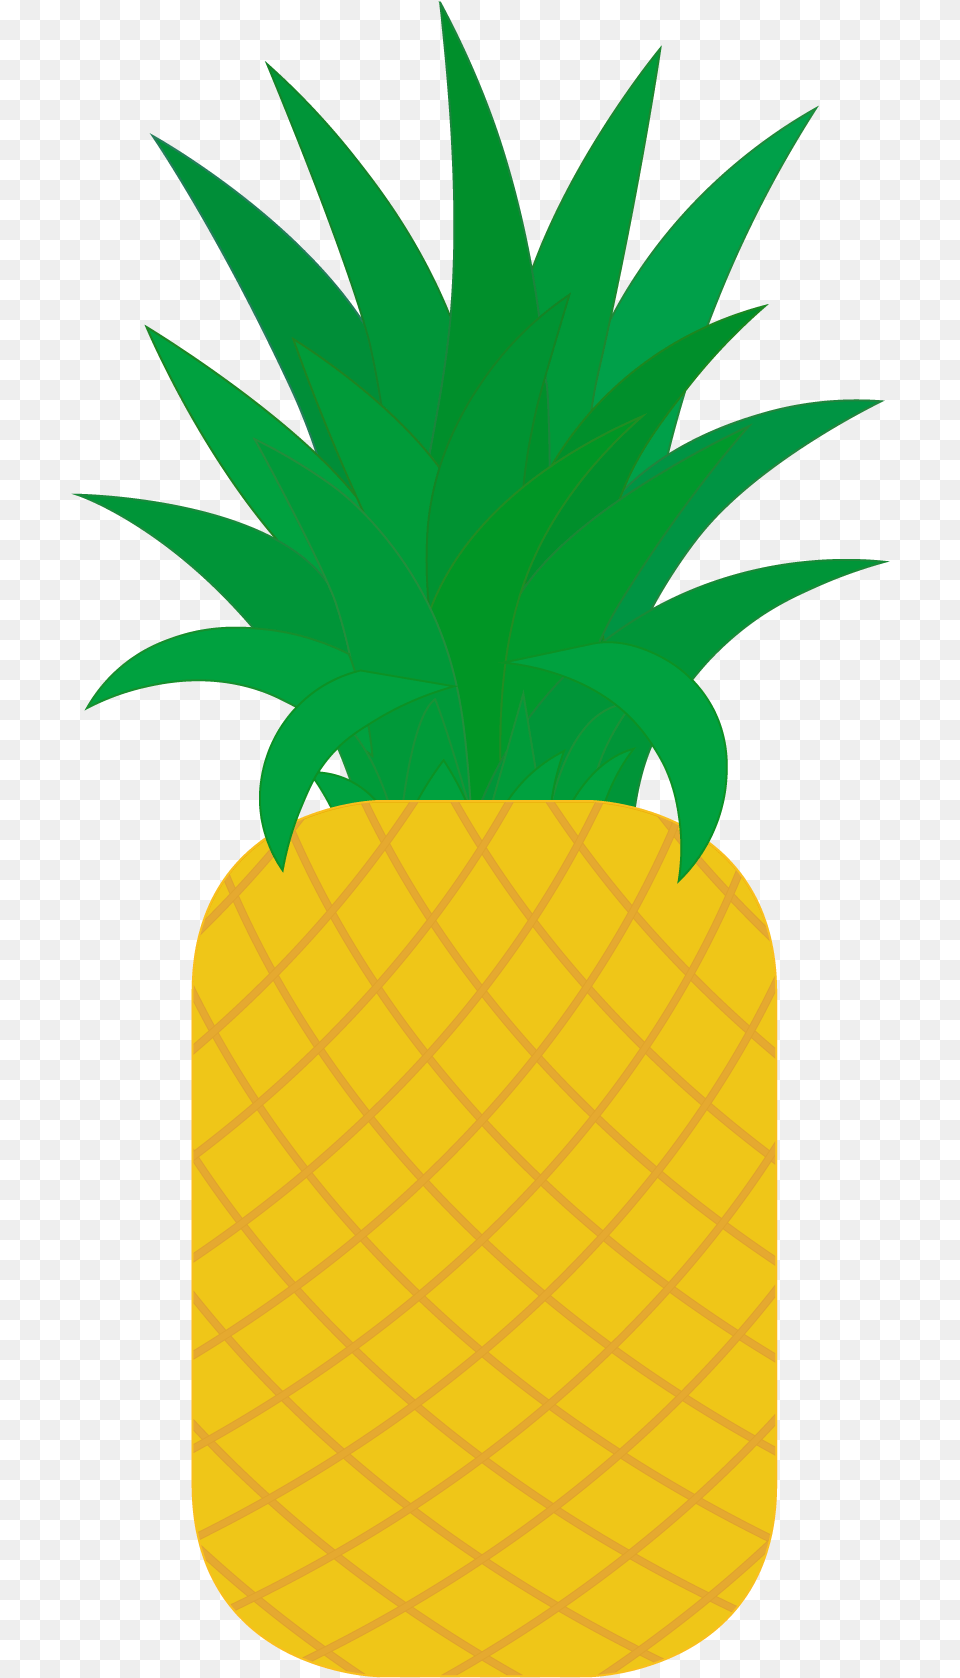 Flat Pineapple Poster Tropical Fruit And Vector Flat Fruit, Food, Plant, Produce Free Png